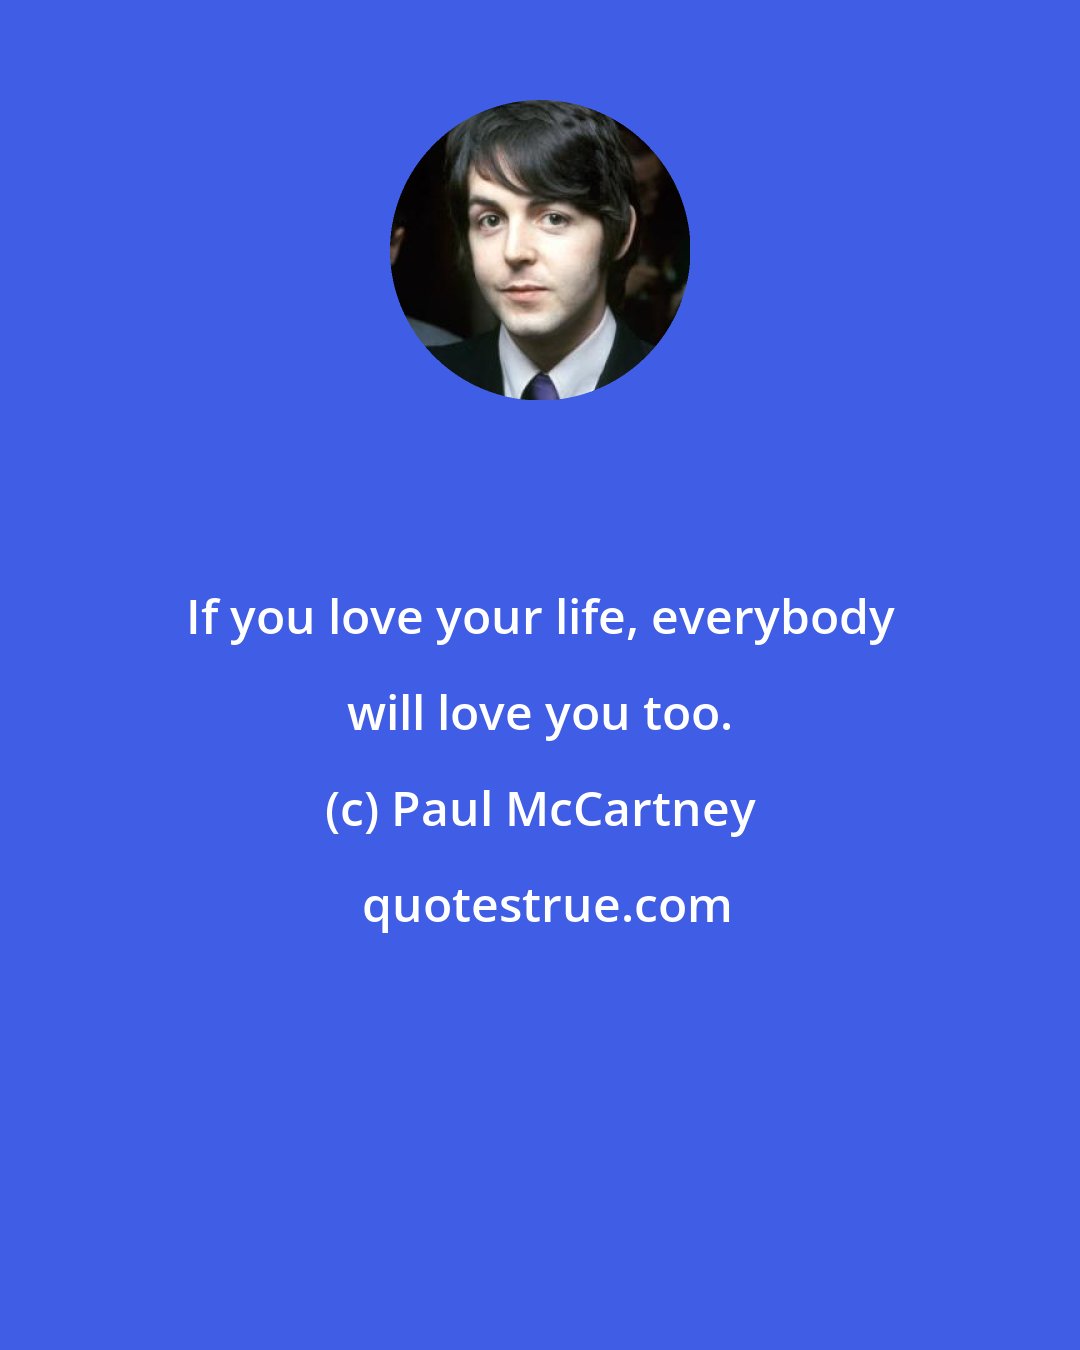 Paul McCartney: If you love your life, everybody will love you too.